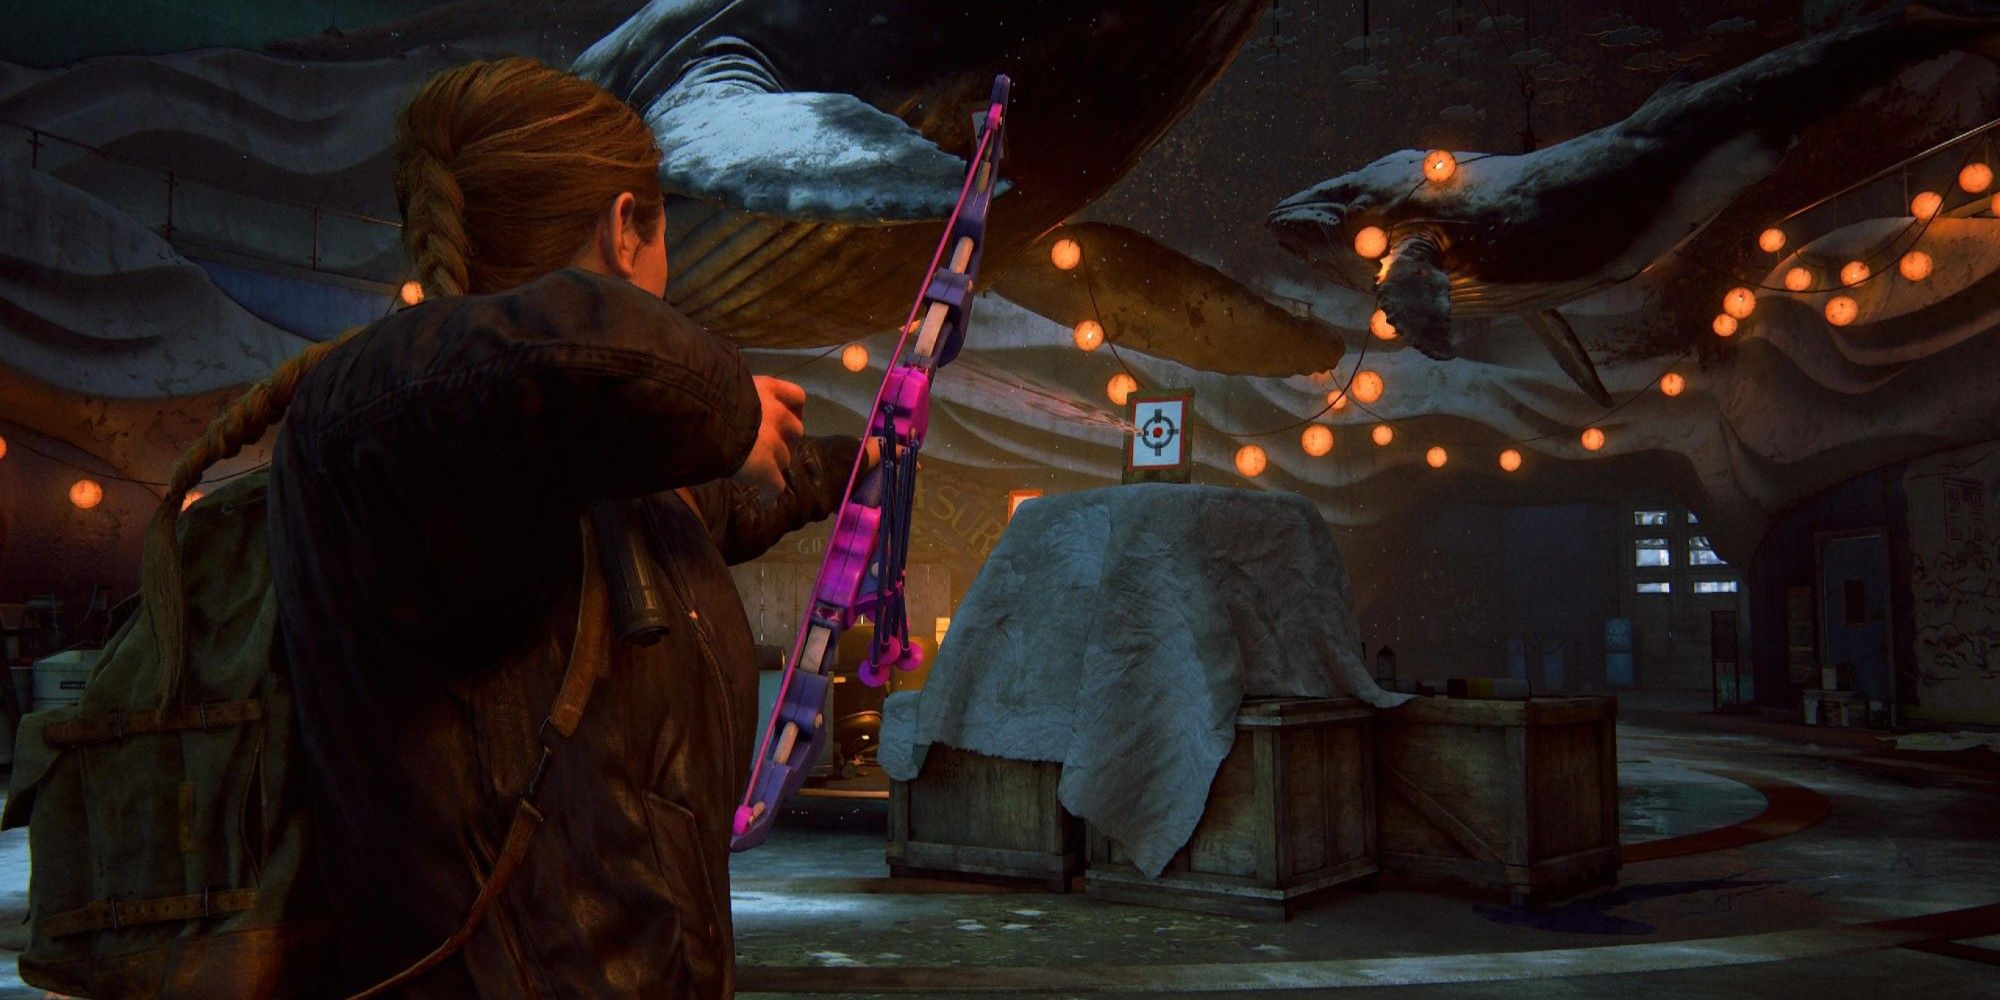 Abby aiming toy arrow in aquarium in The Last of Us Part 2